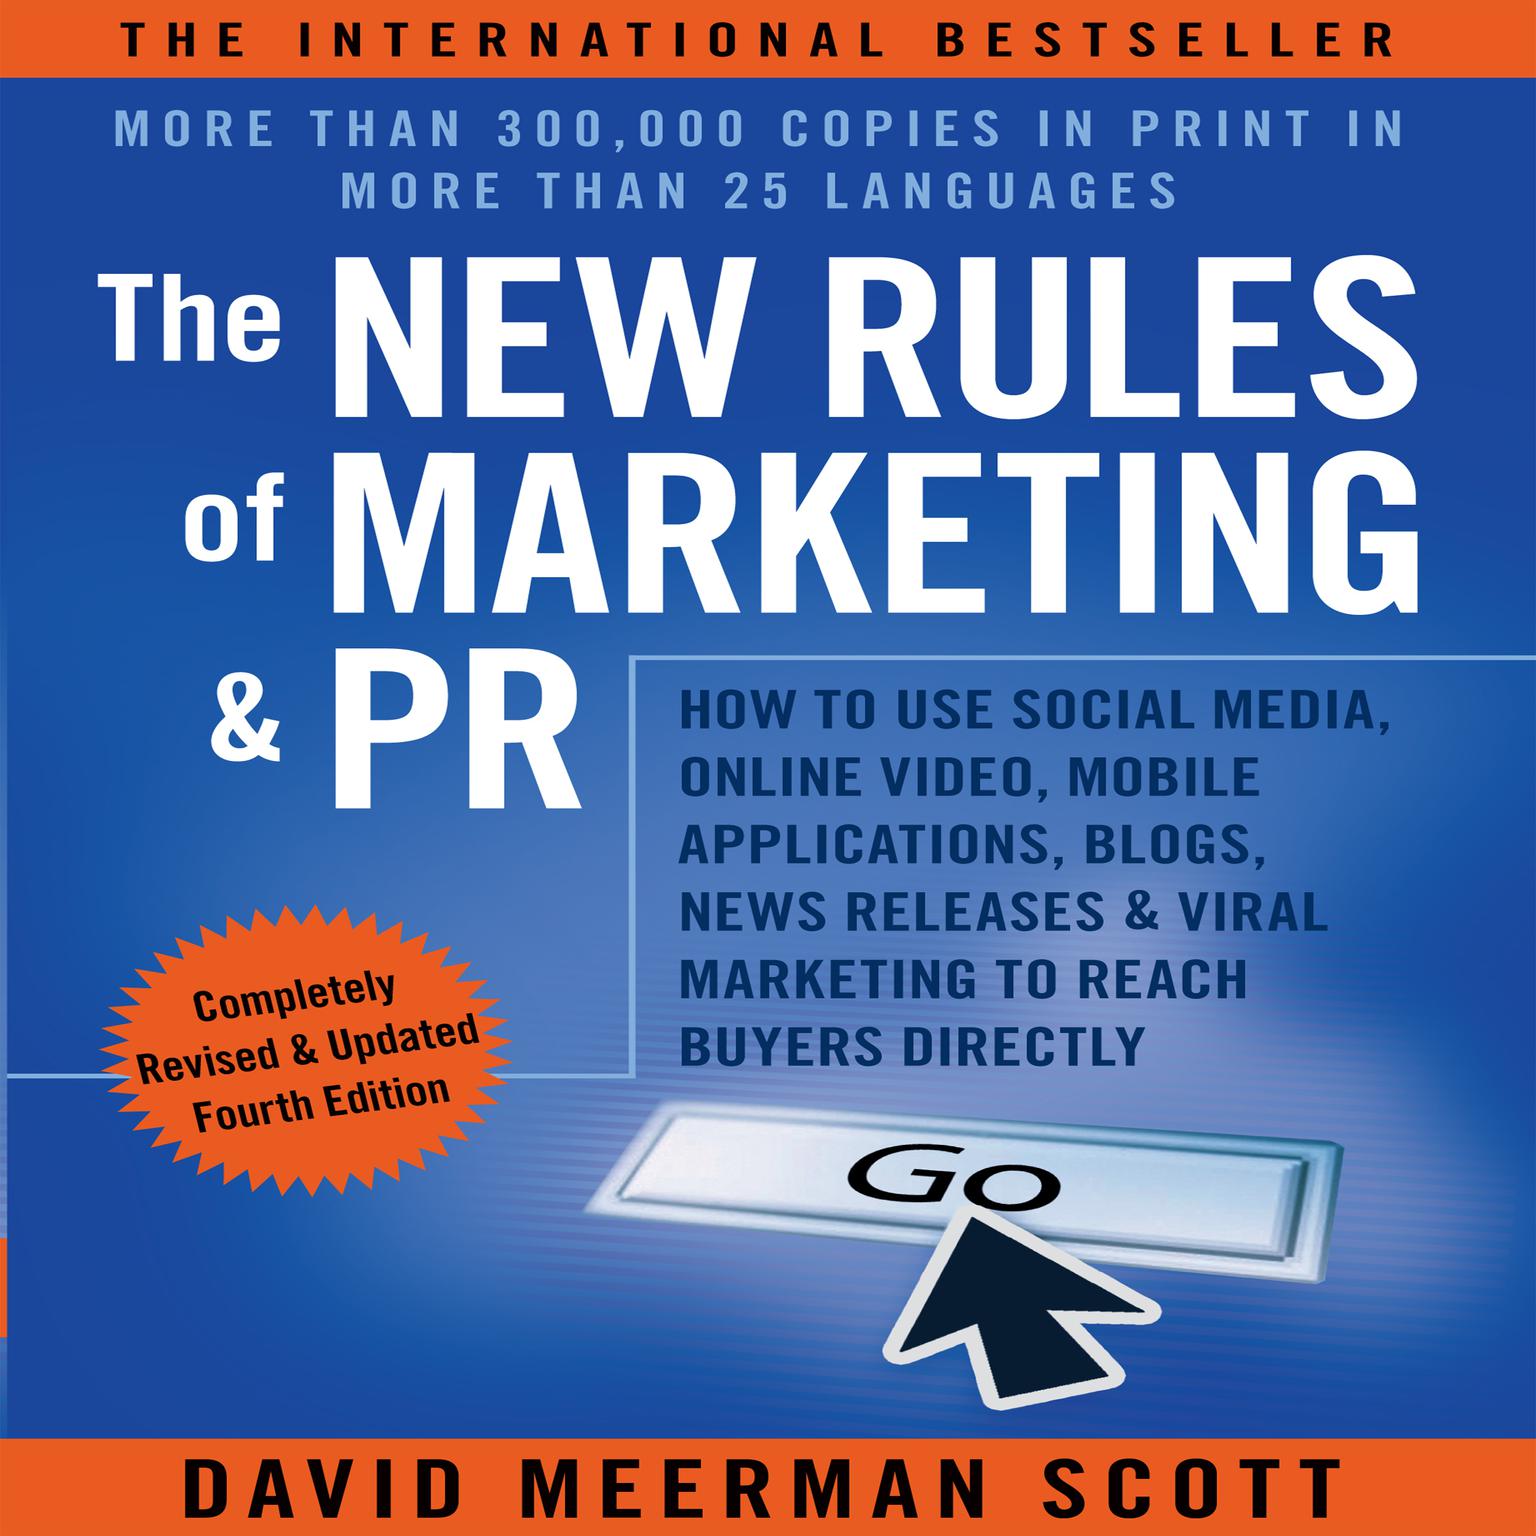 The New Rules of Marketing & PR 4th Edition: How to Use Social Media, Online Video, Mobile Applications, Blogs, News Releases, and Viral Marketing to Reach Buyers Directly Audiobook, by David Meerman Scott